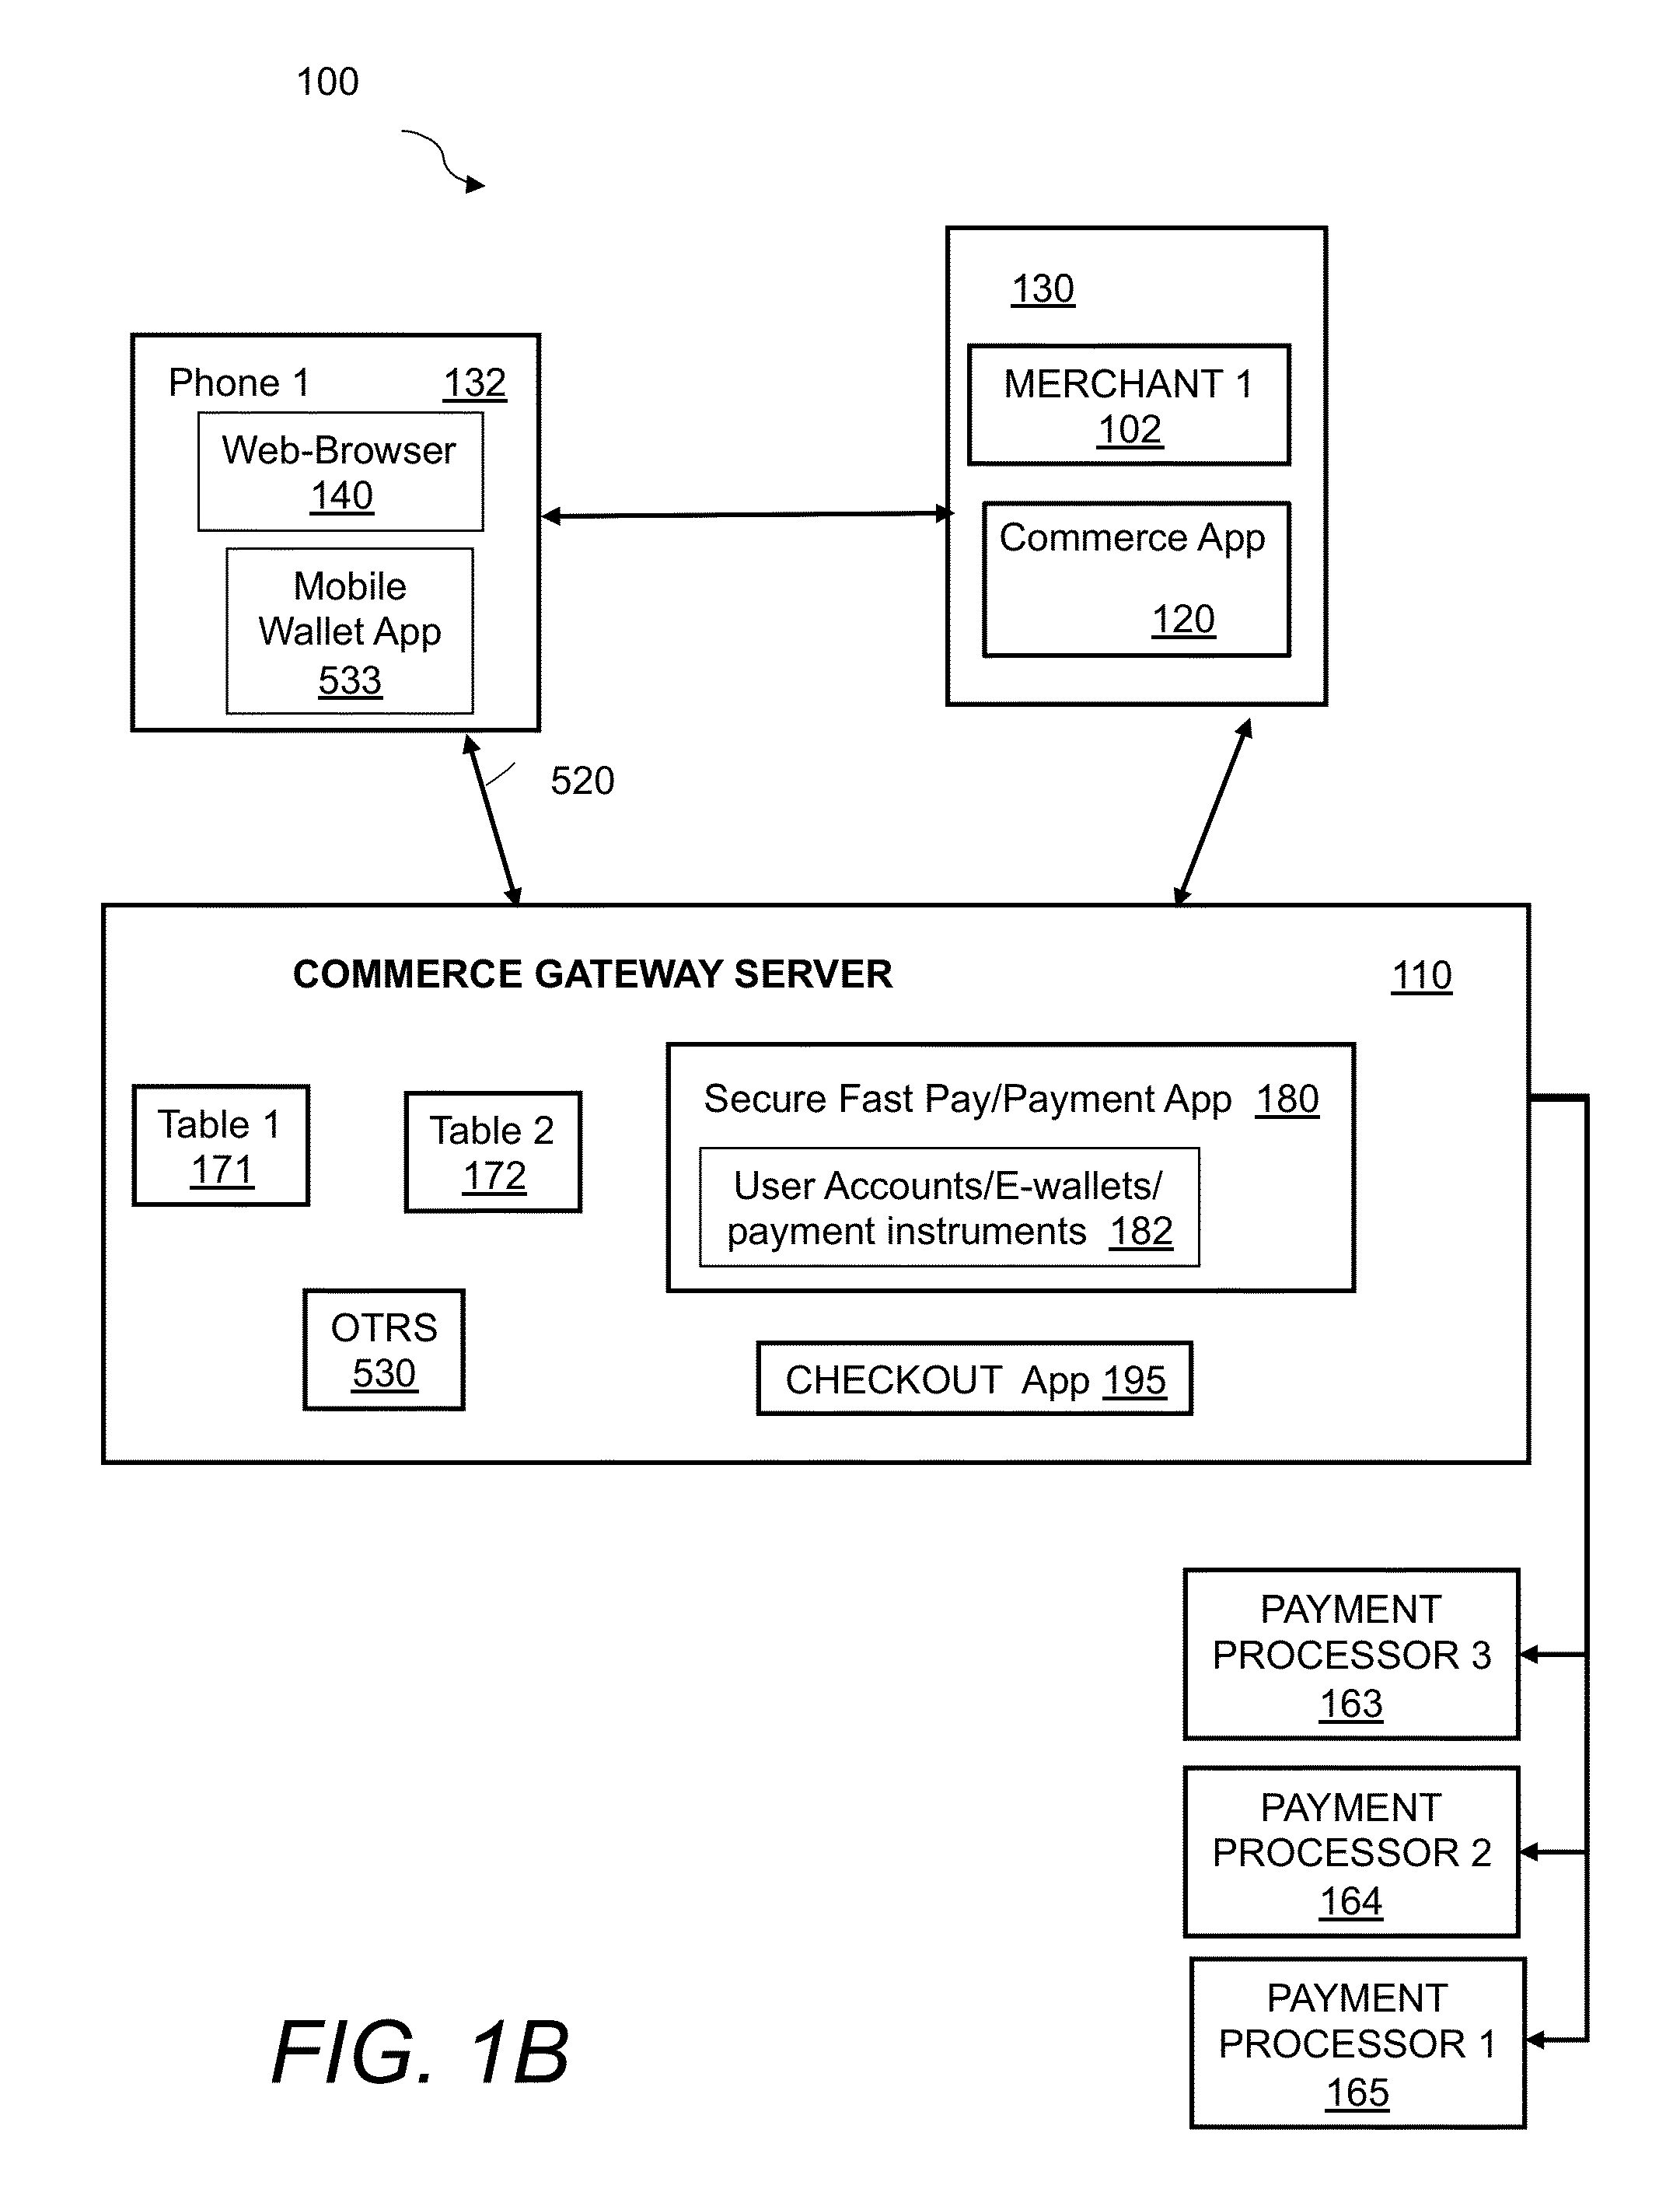 System and method for incorporating one-time tokens, coupons, and reward systems into merchant point of sale checkout systems